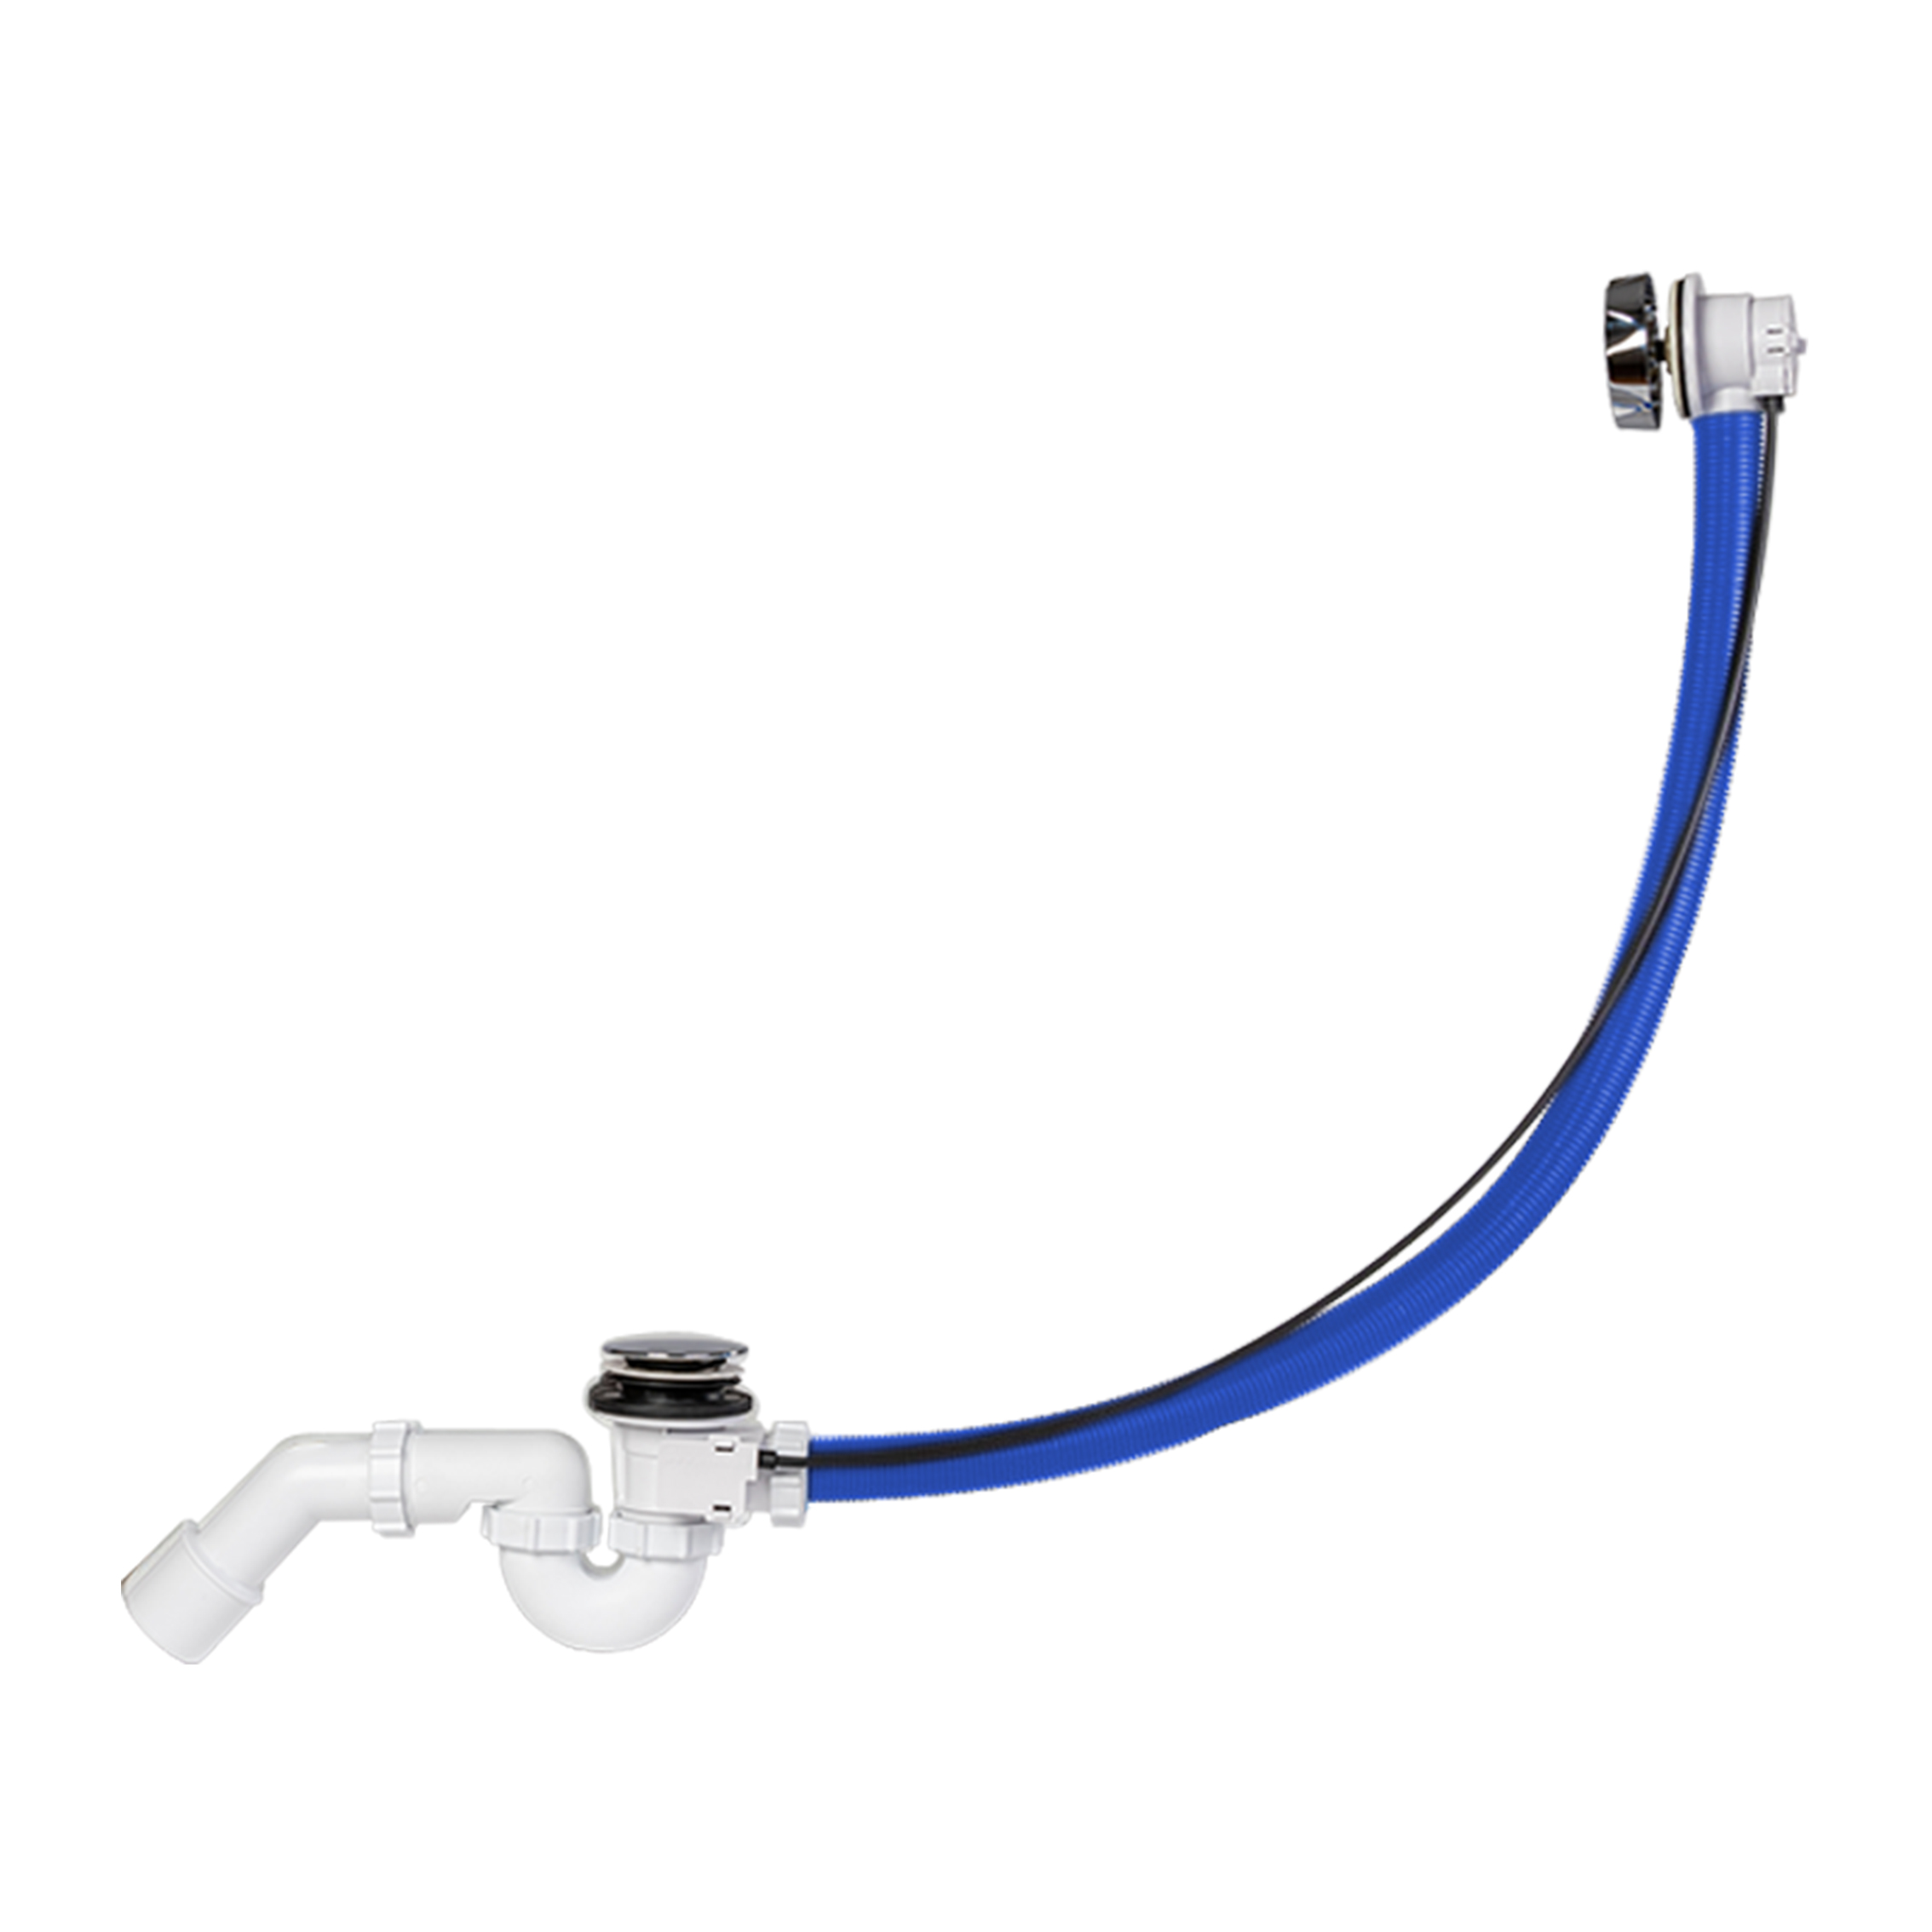 Automated bath trap chrome plated, with 1200 mm long cable with bowden